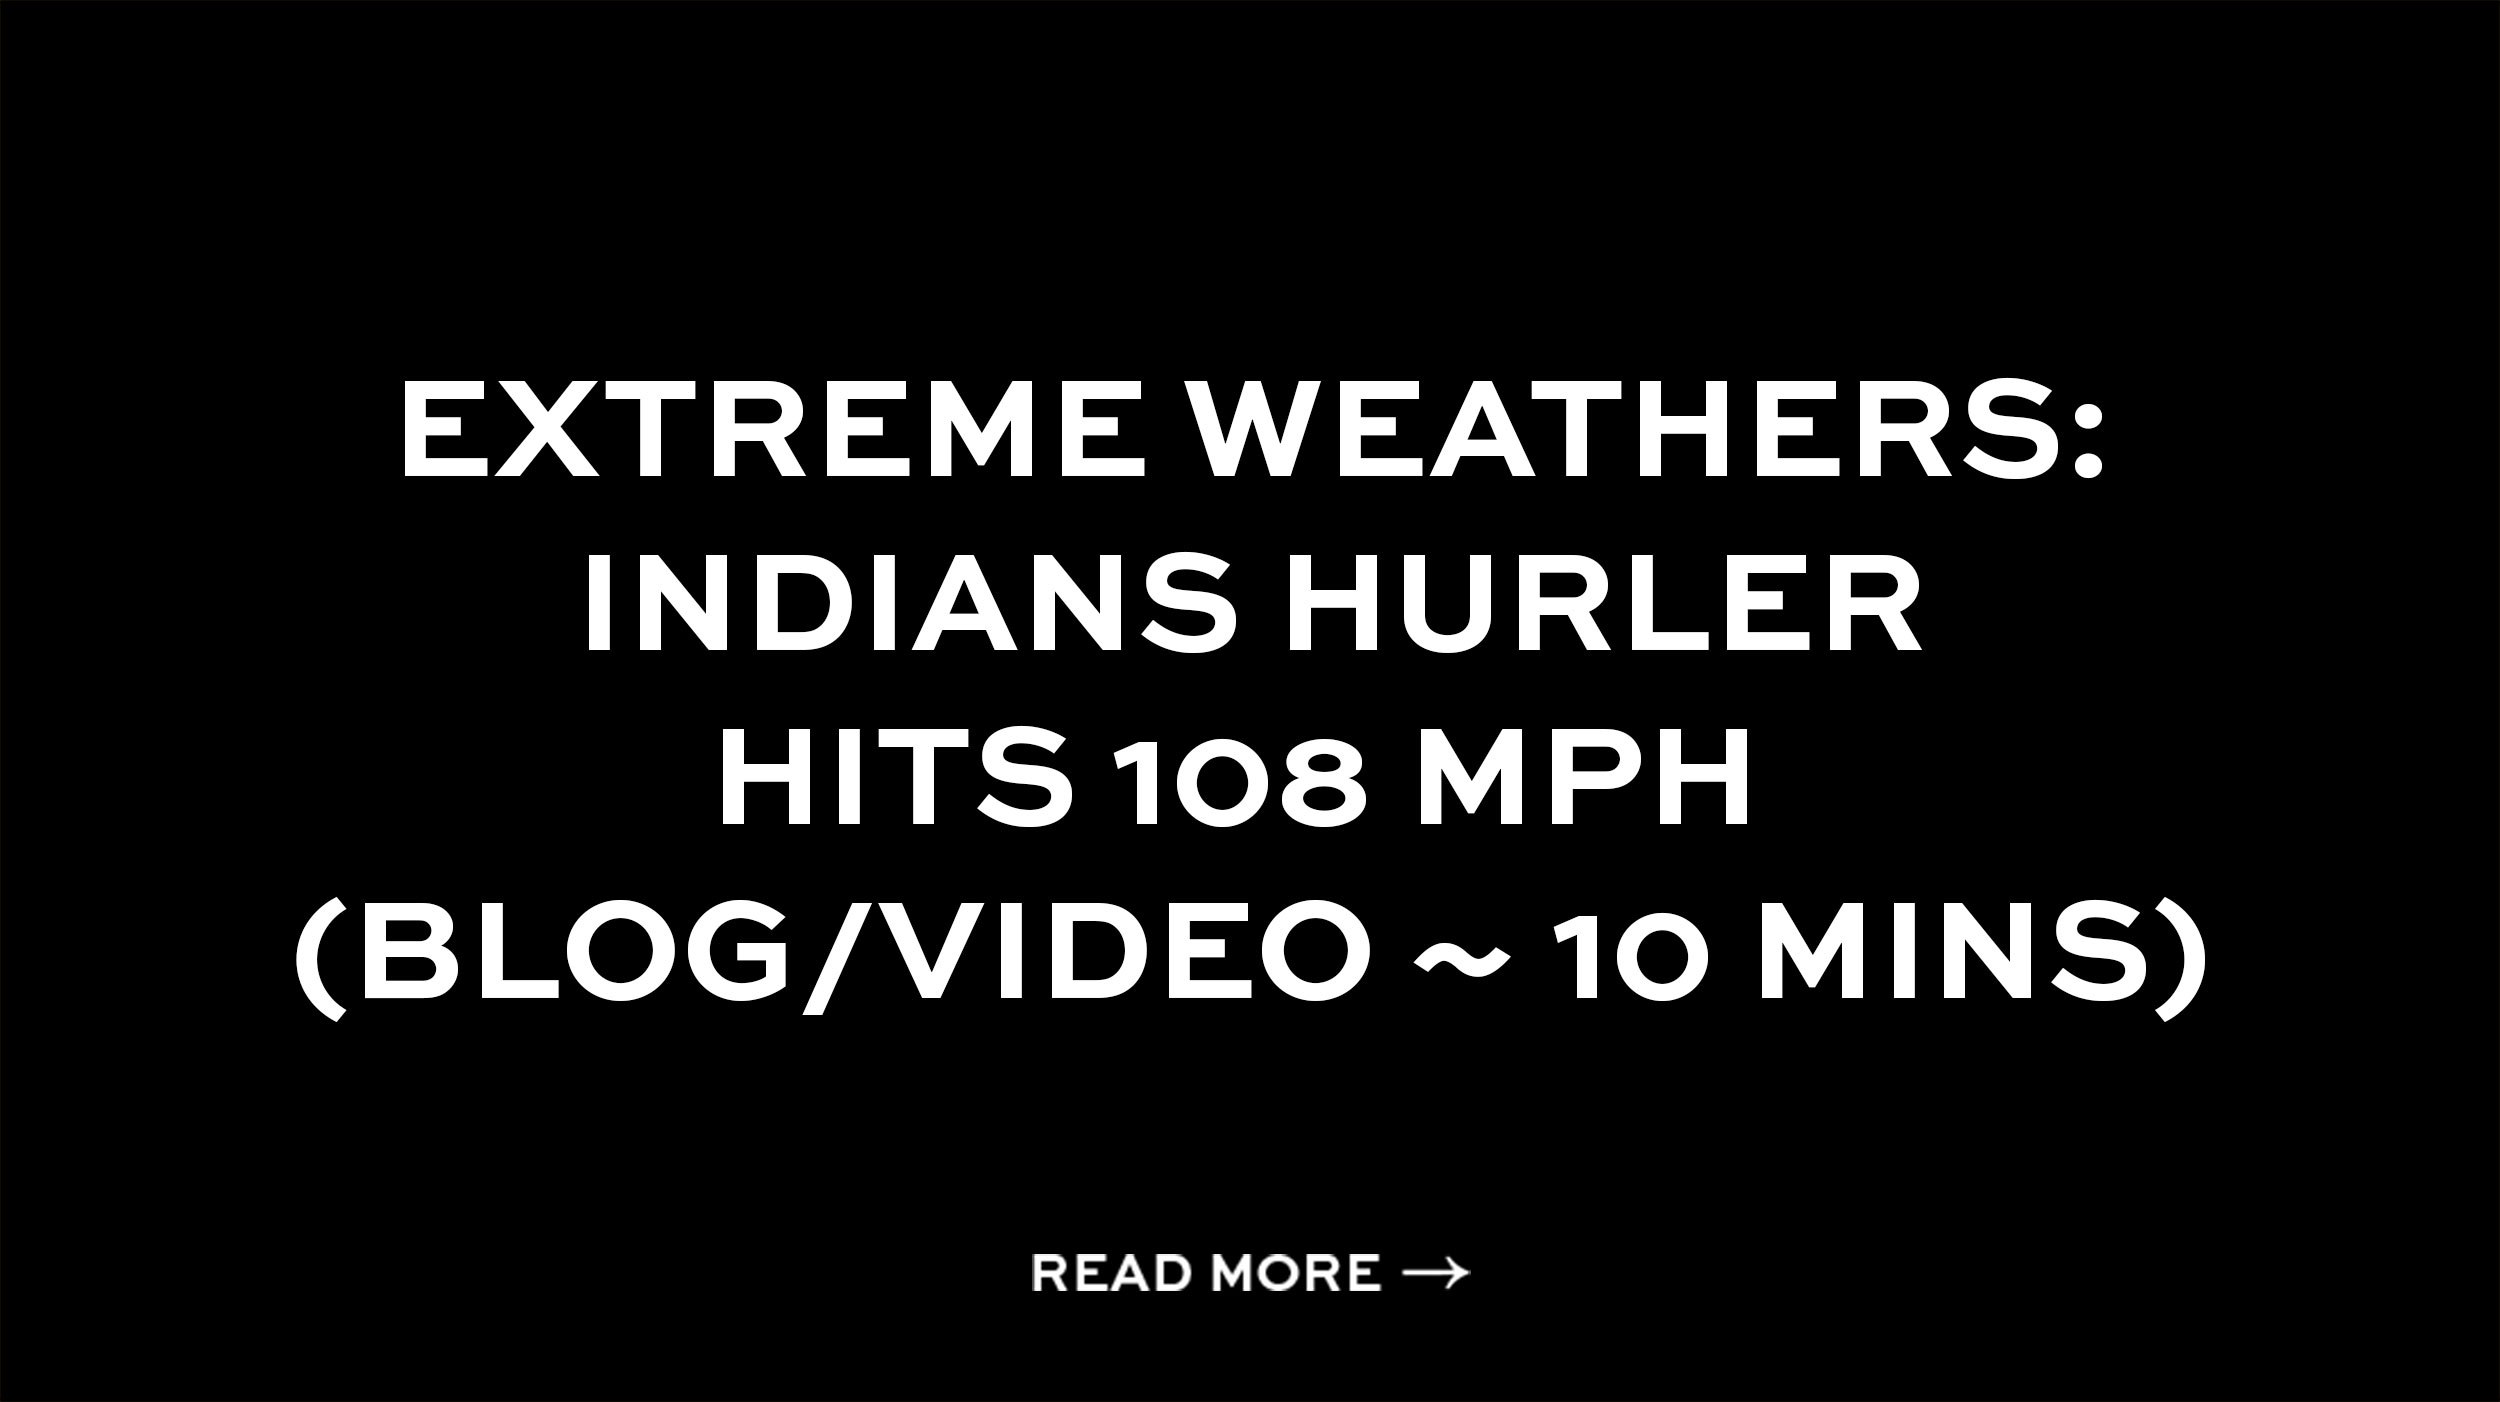 Extreme Weathers: Indians hurler hits 108 mph (Blog/Video ~ 10 mins)